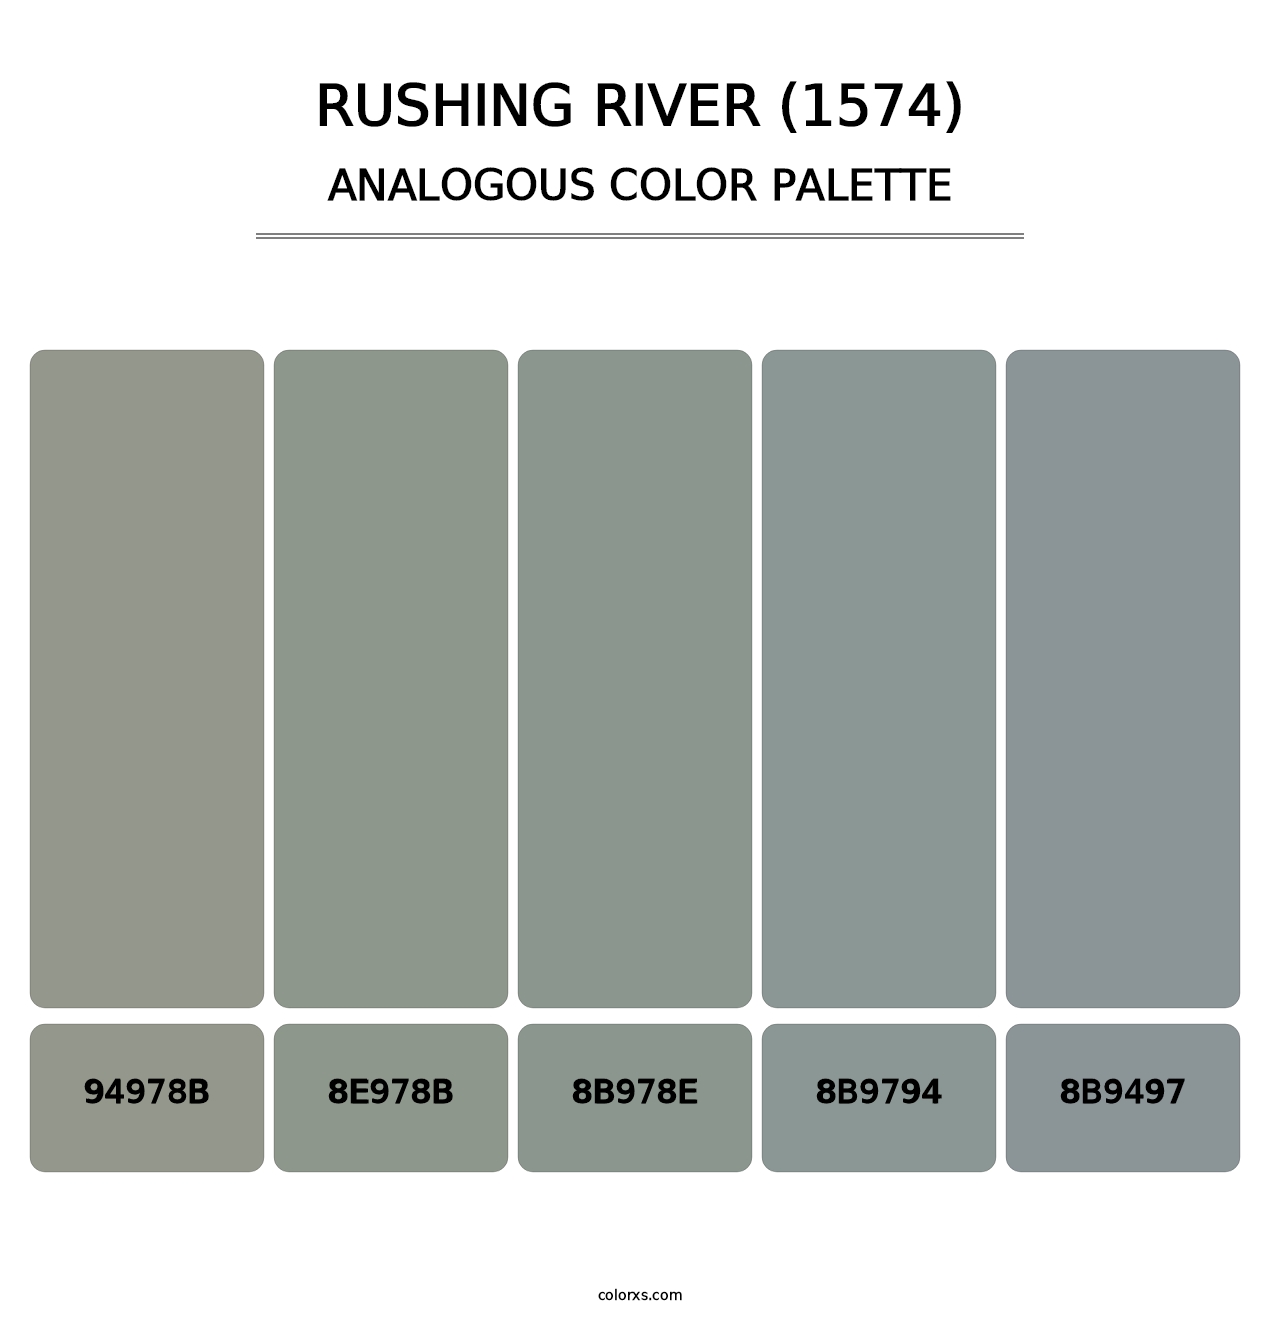 Rushing River (1574) - Analogous Color Palette